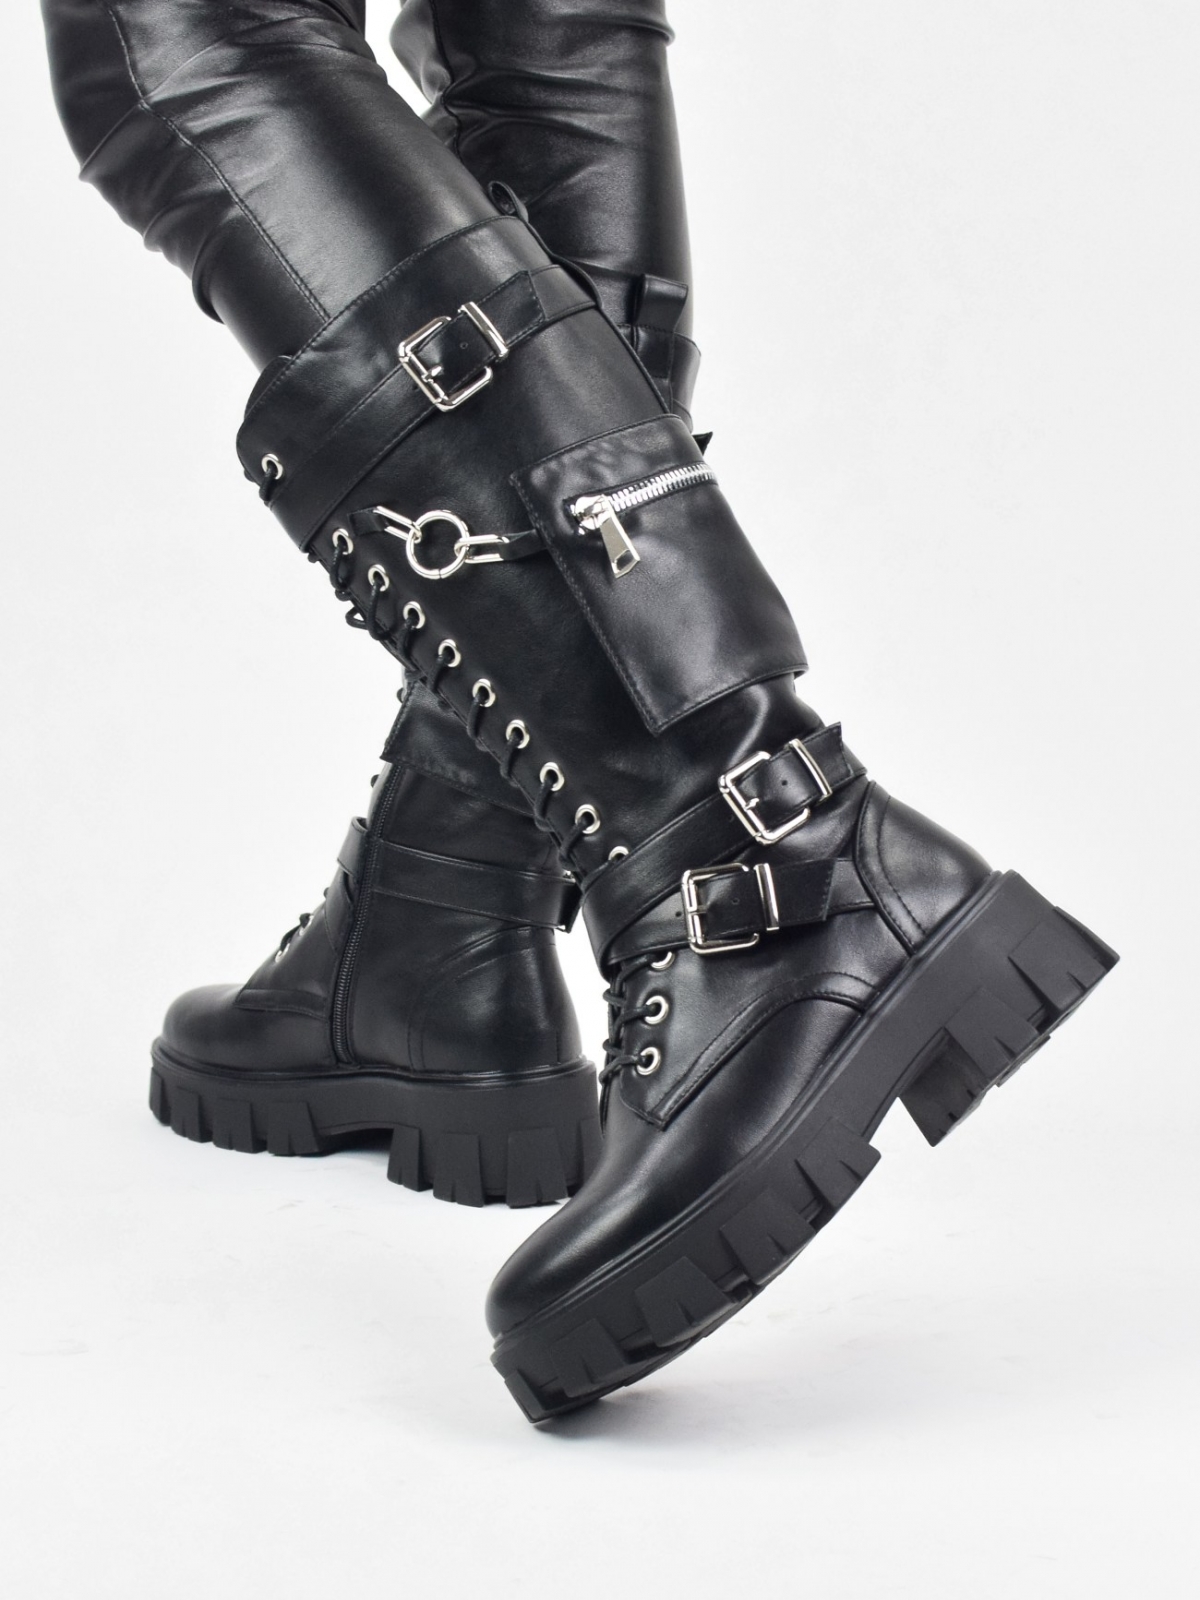 Exclusive design high boots with pocket and metal details in black